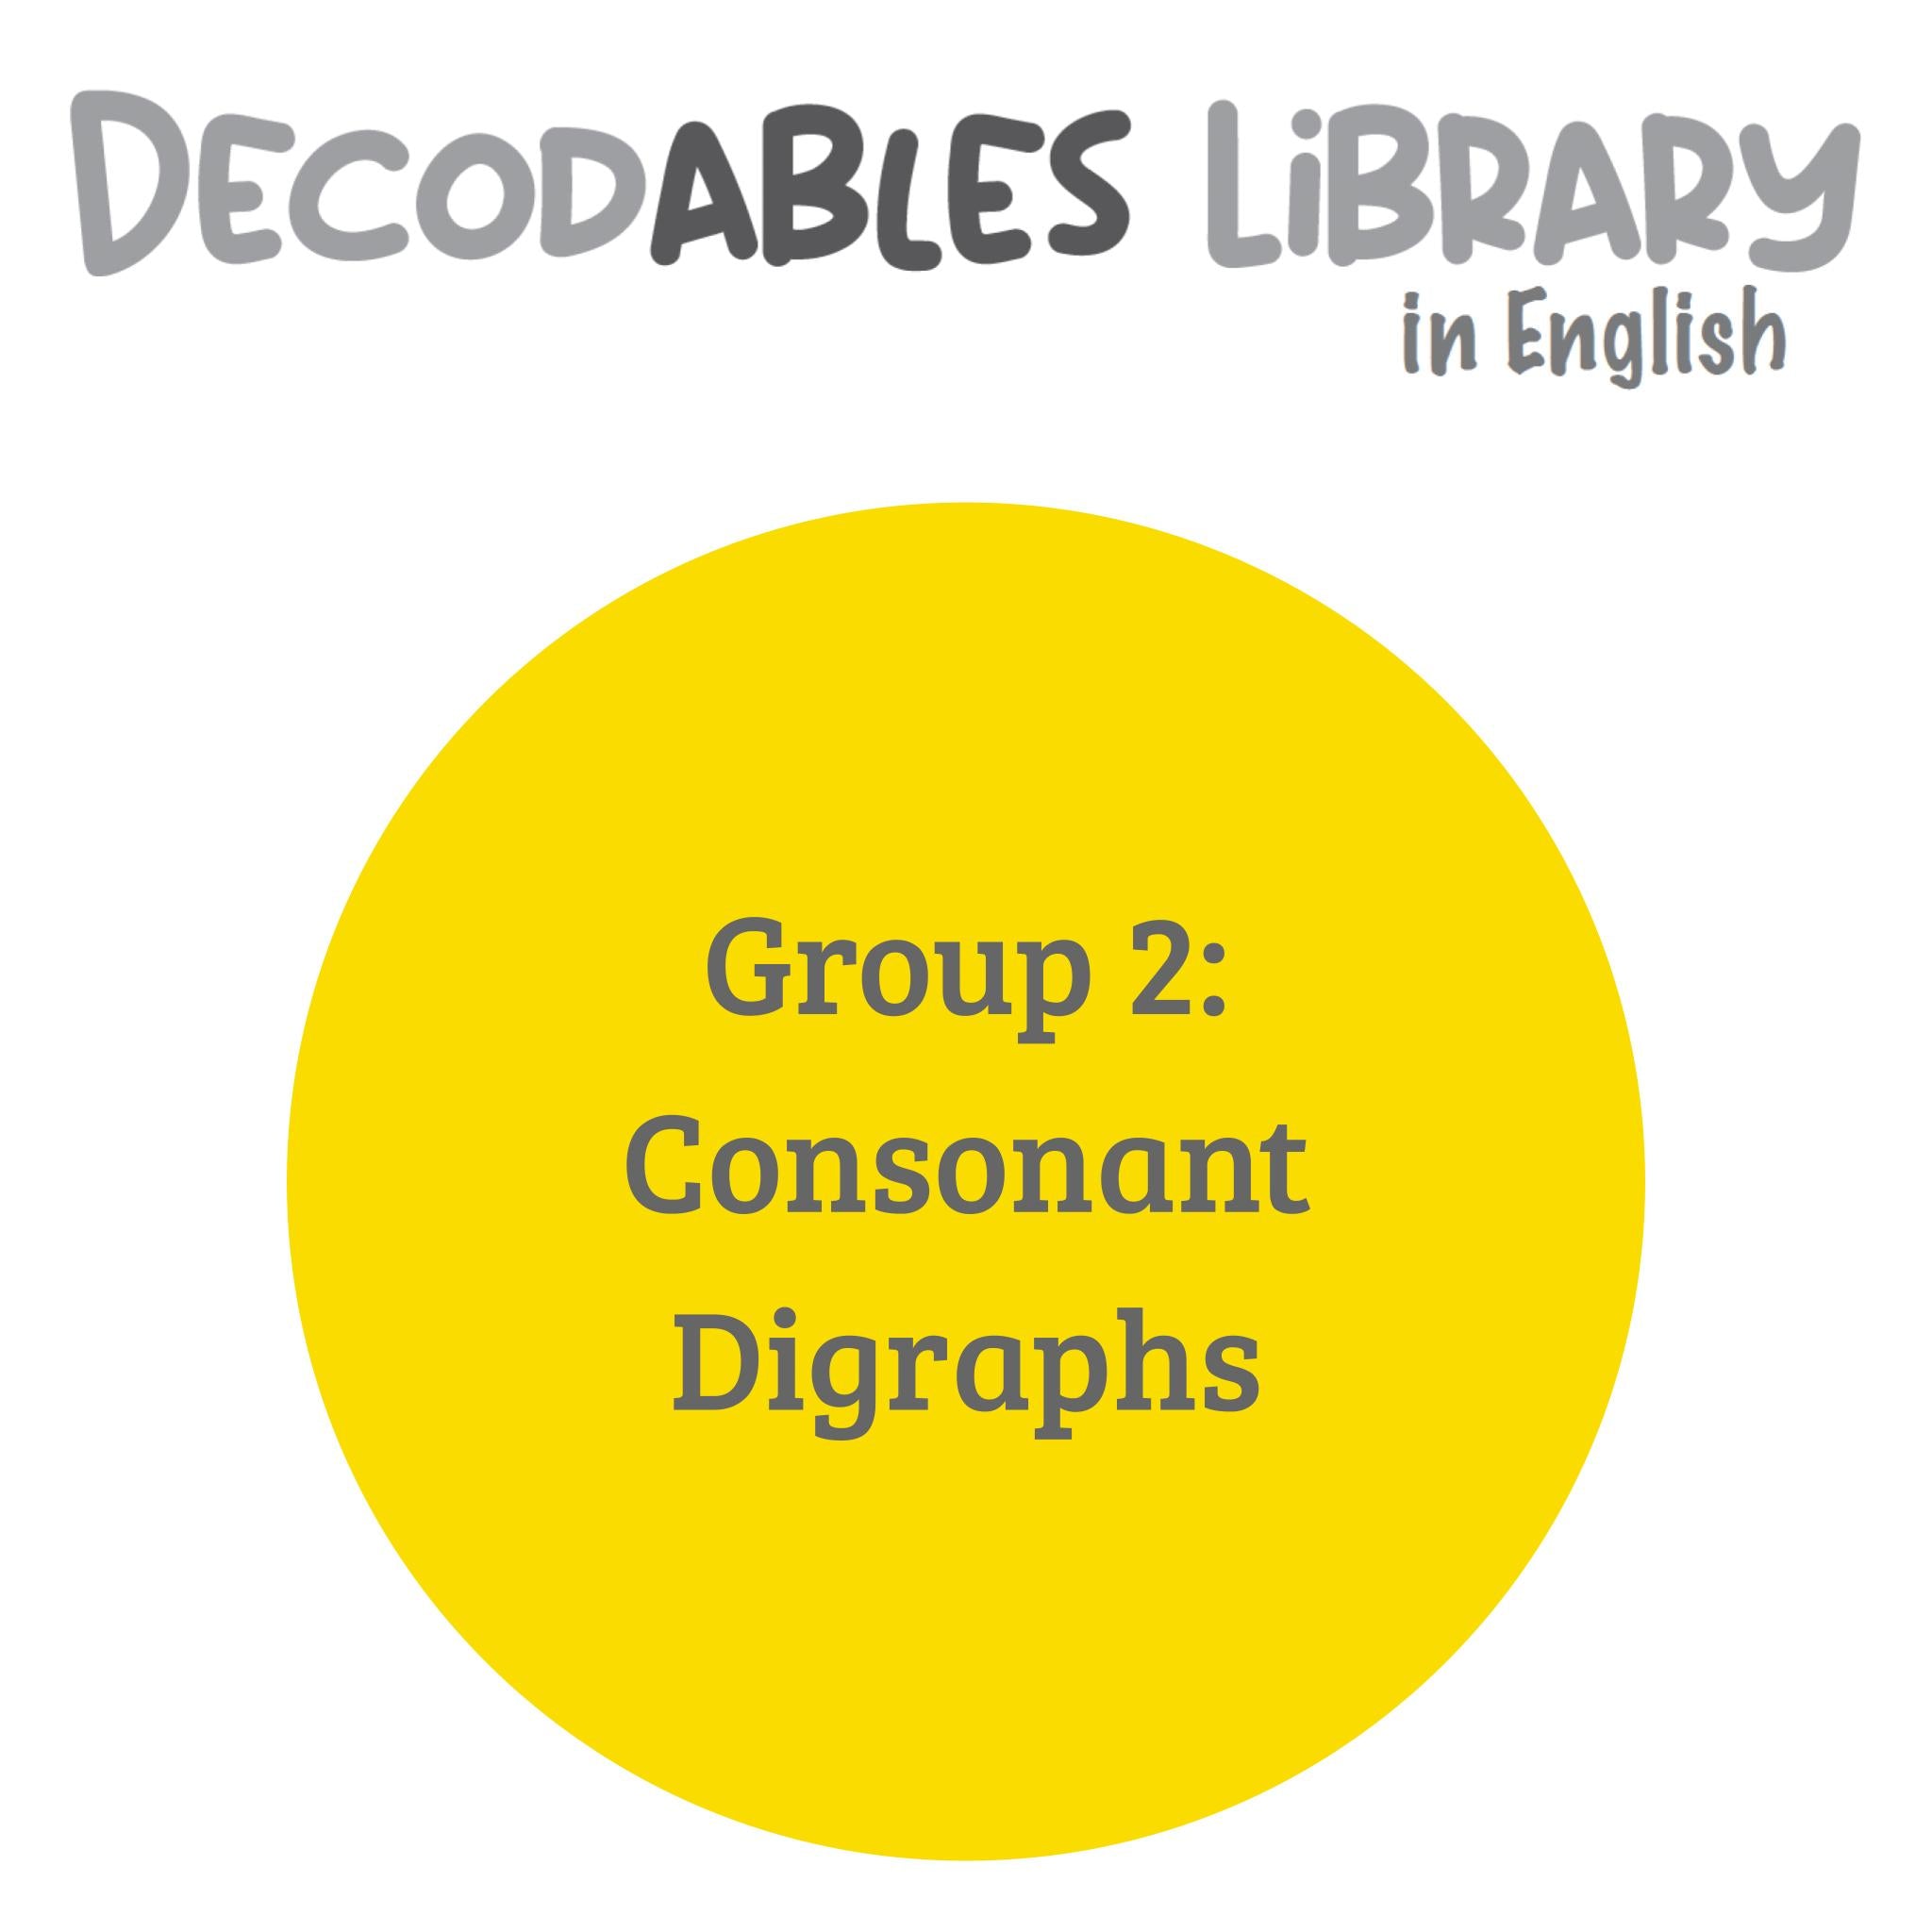 English Decodables Library - Group 2: Consonant Digraphs (set of 11 titles)